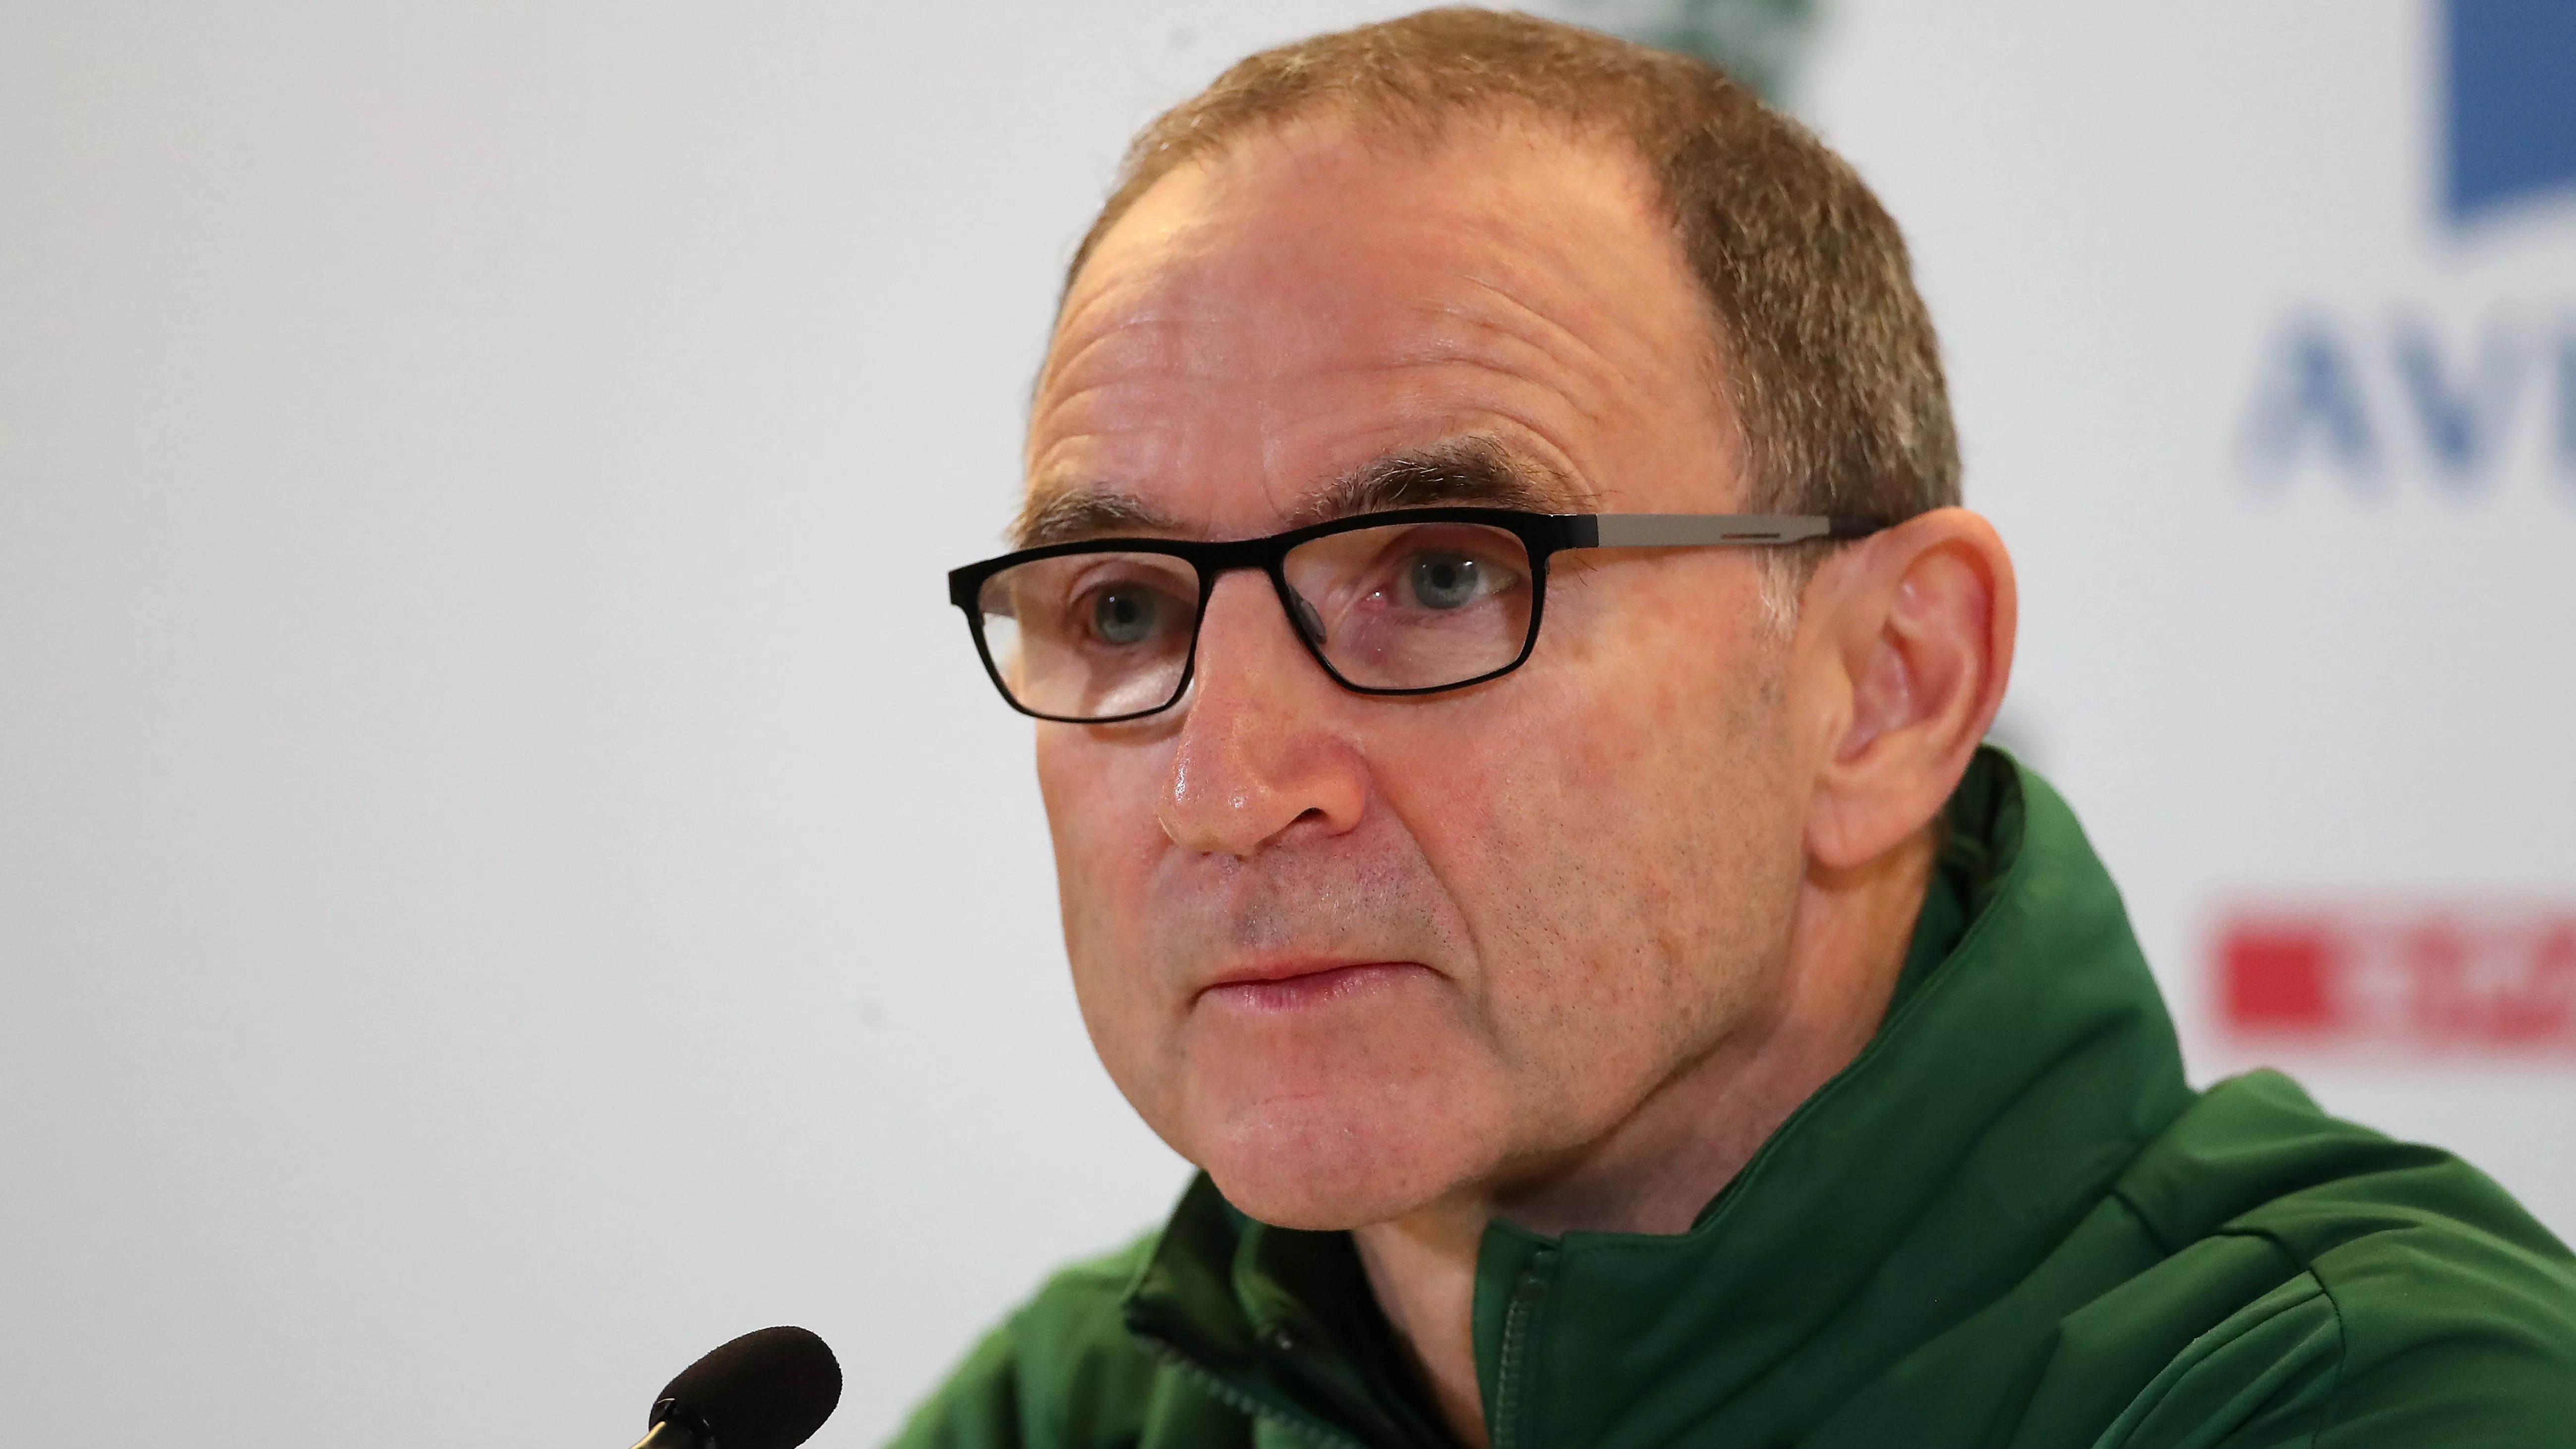 Martin O’Neill set to be appointed Nottingham Forest manager